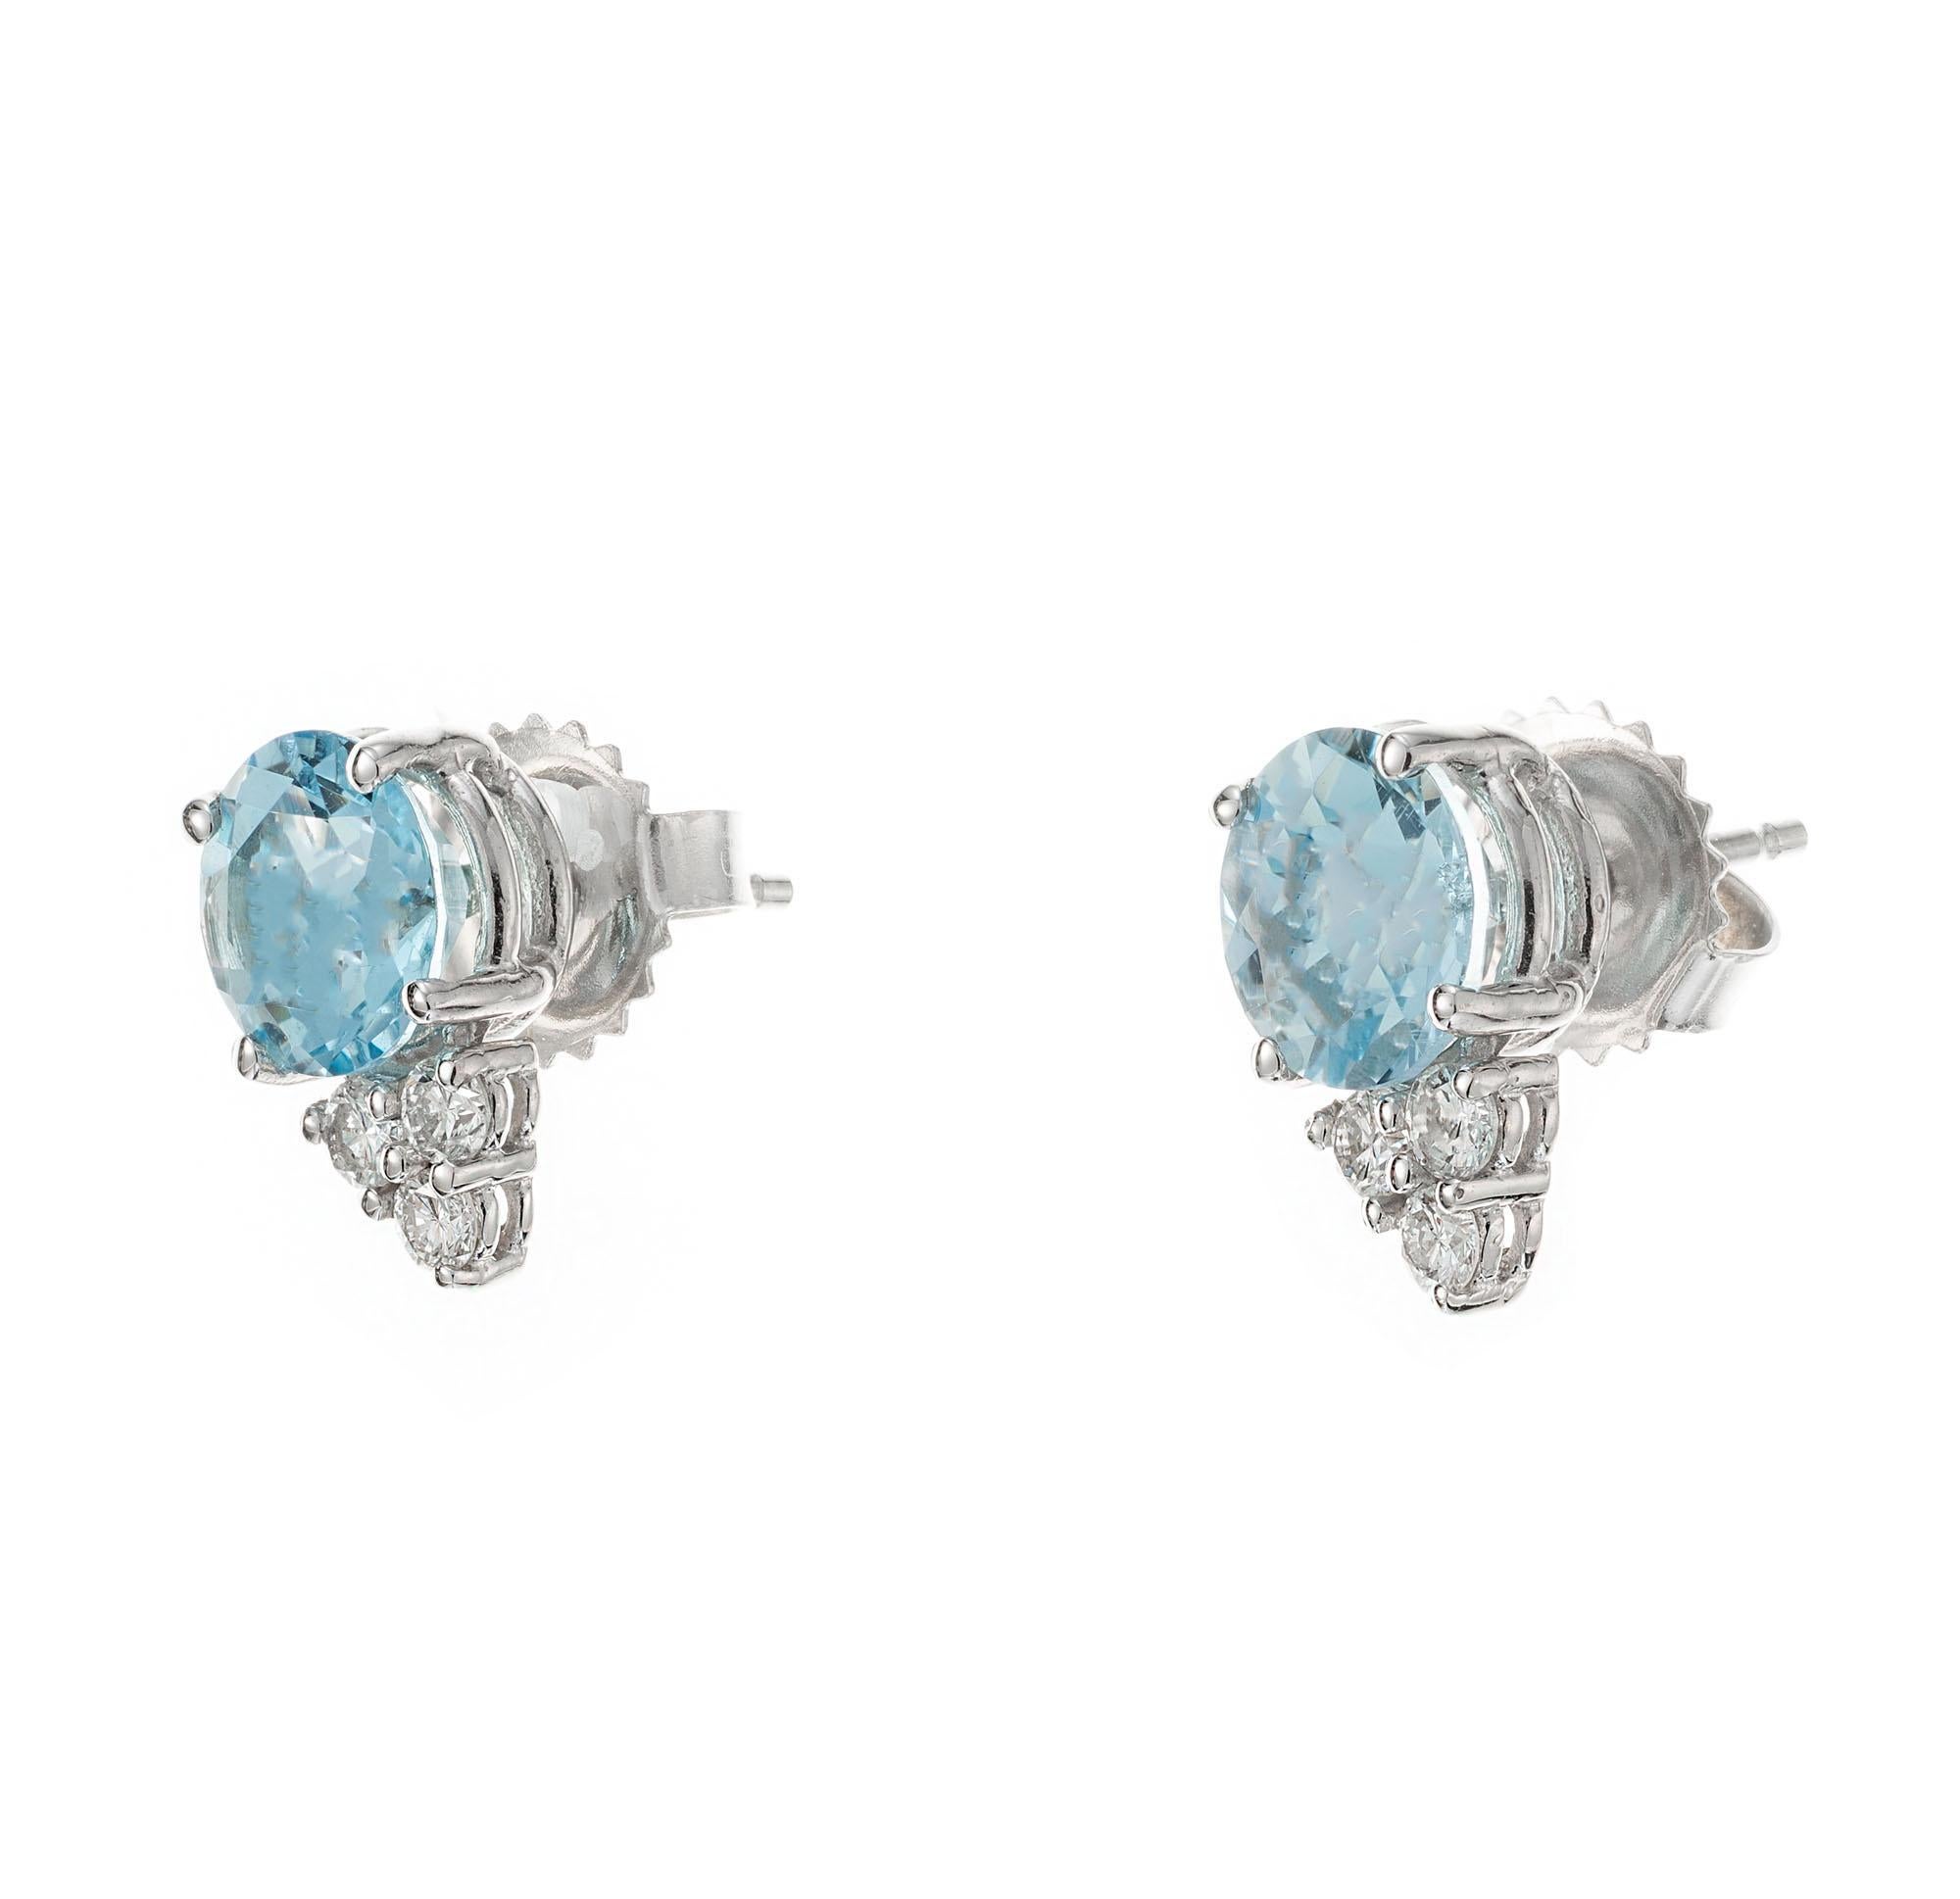 Aqua and diamond earrings. 2 round blue aquamarines set in 14k white gold basket settings with 6 round brilliant cut diamonds. Designed and crafted in the Peter Suchy workshop.

2 round blue aquamarines, VS approx. 1.87cts
6 round brilliant cut